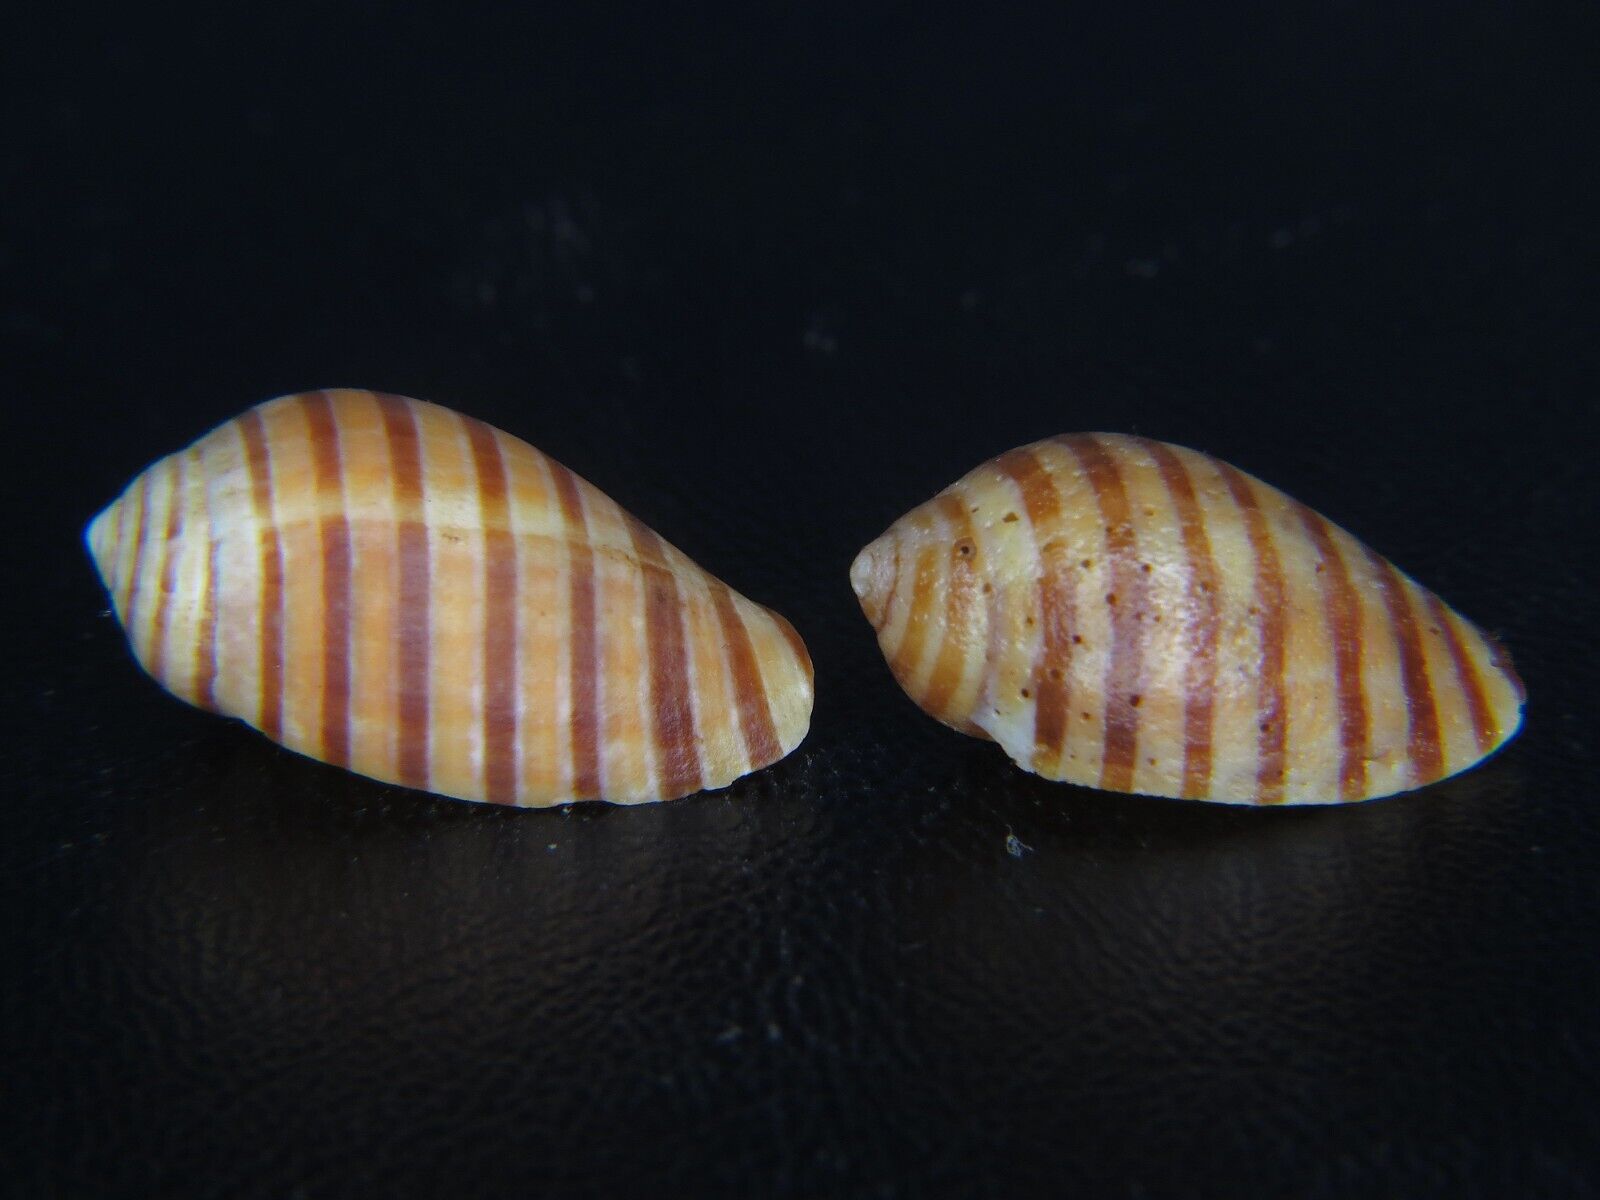 VEXILLA VEXILLUM: 20.24MM-THE ONE ON THE RIGHT IS FREE FROM HAWAII